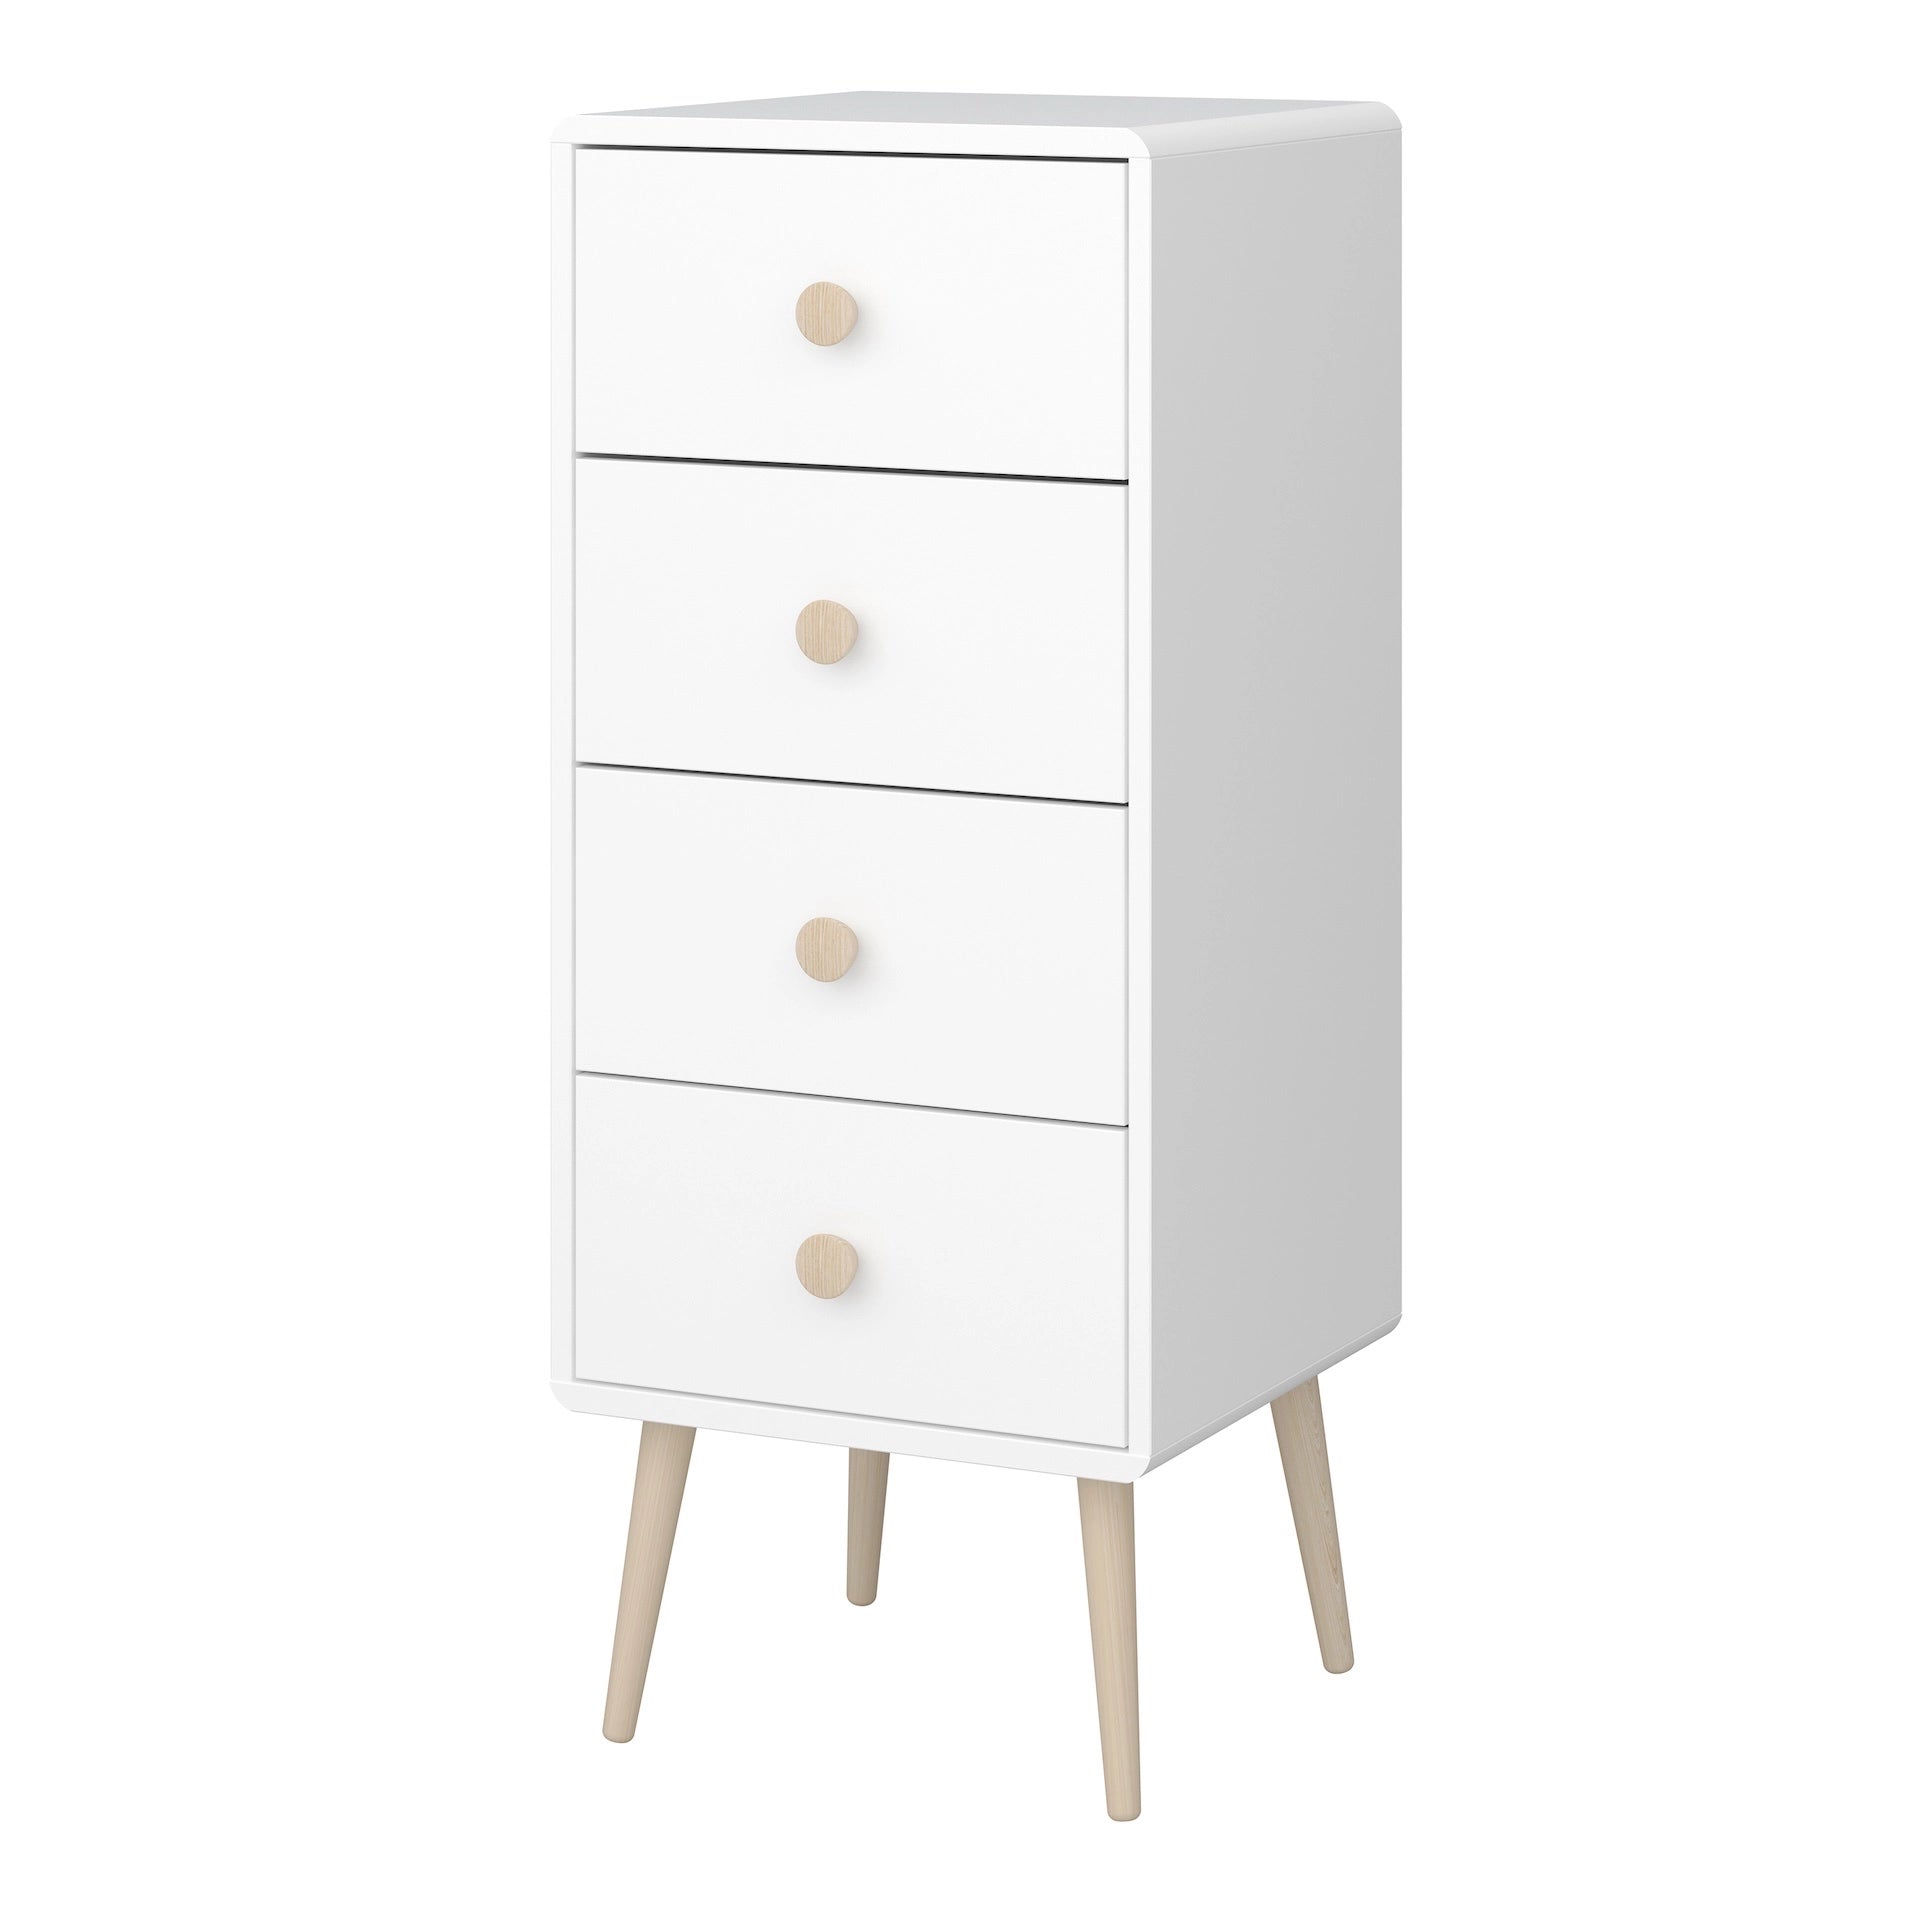 Furniture To Go Gaia 4 Drawer Chest in Pure White